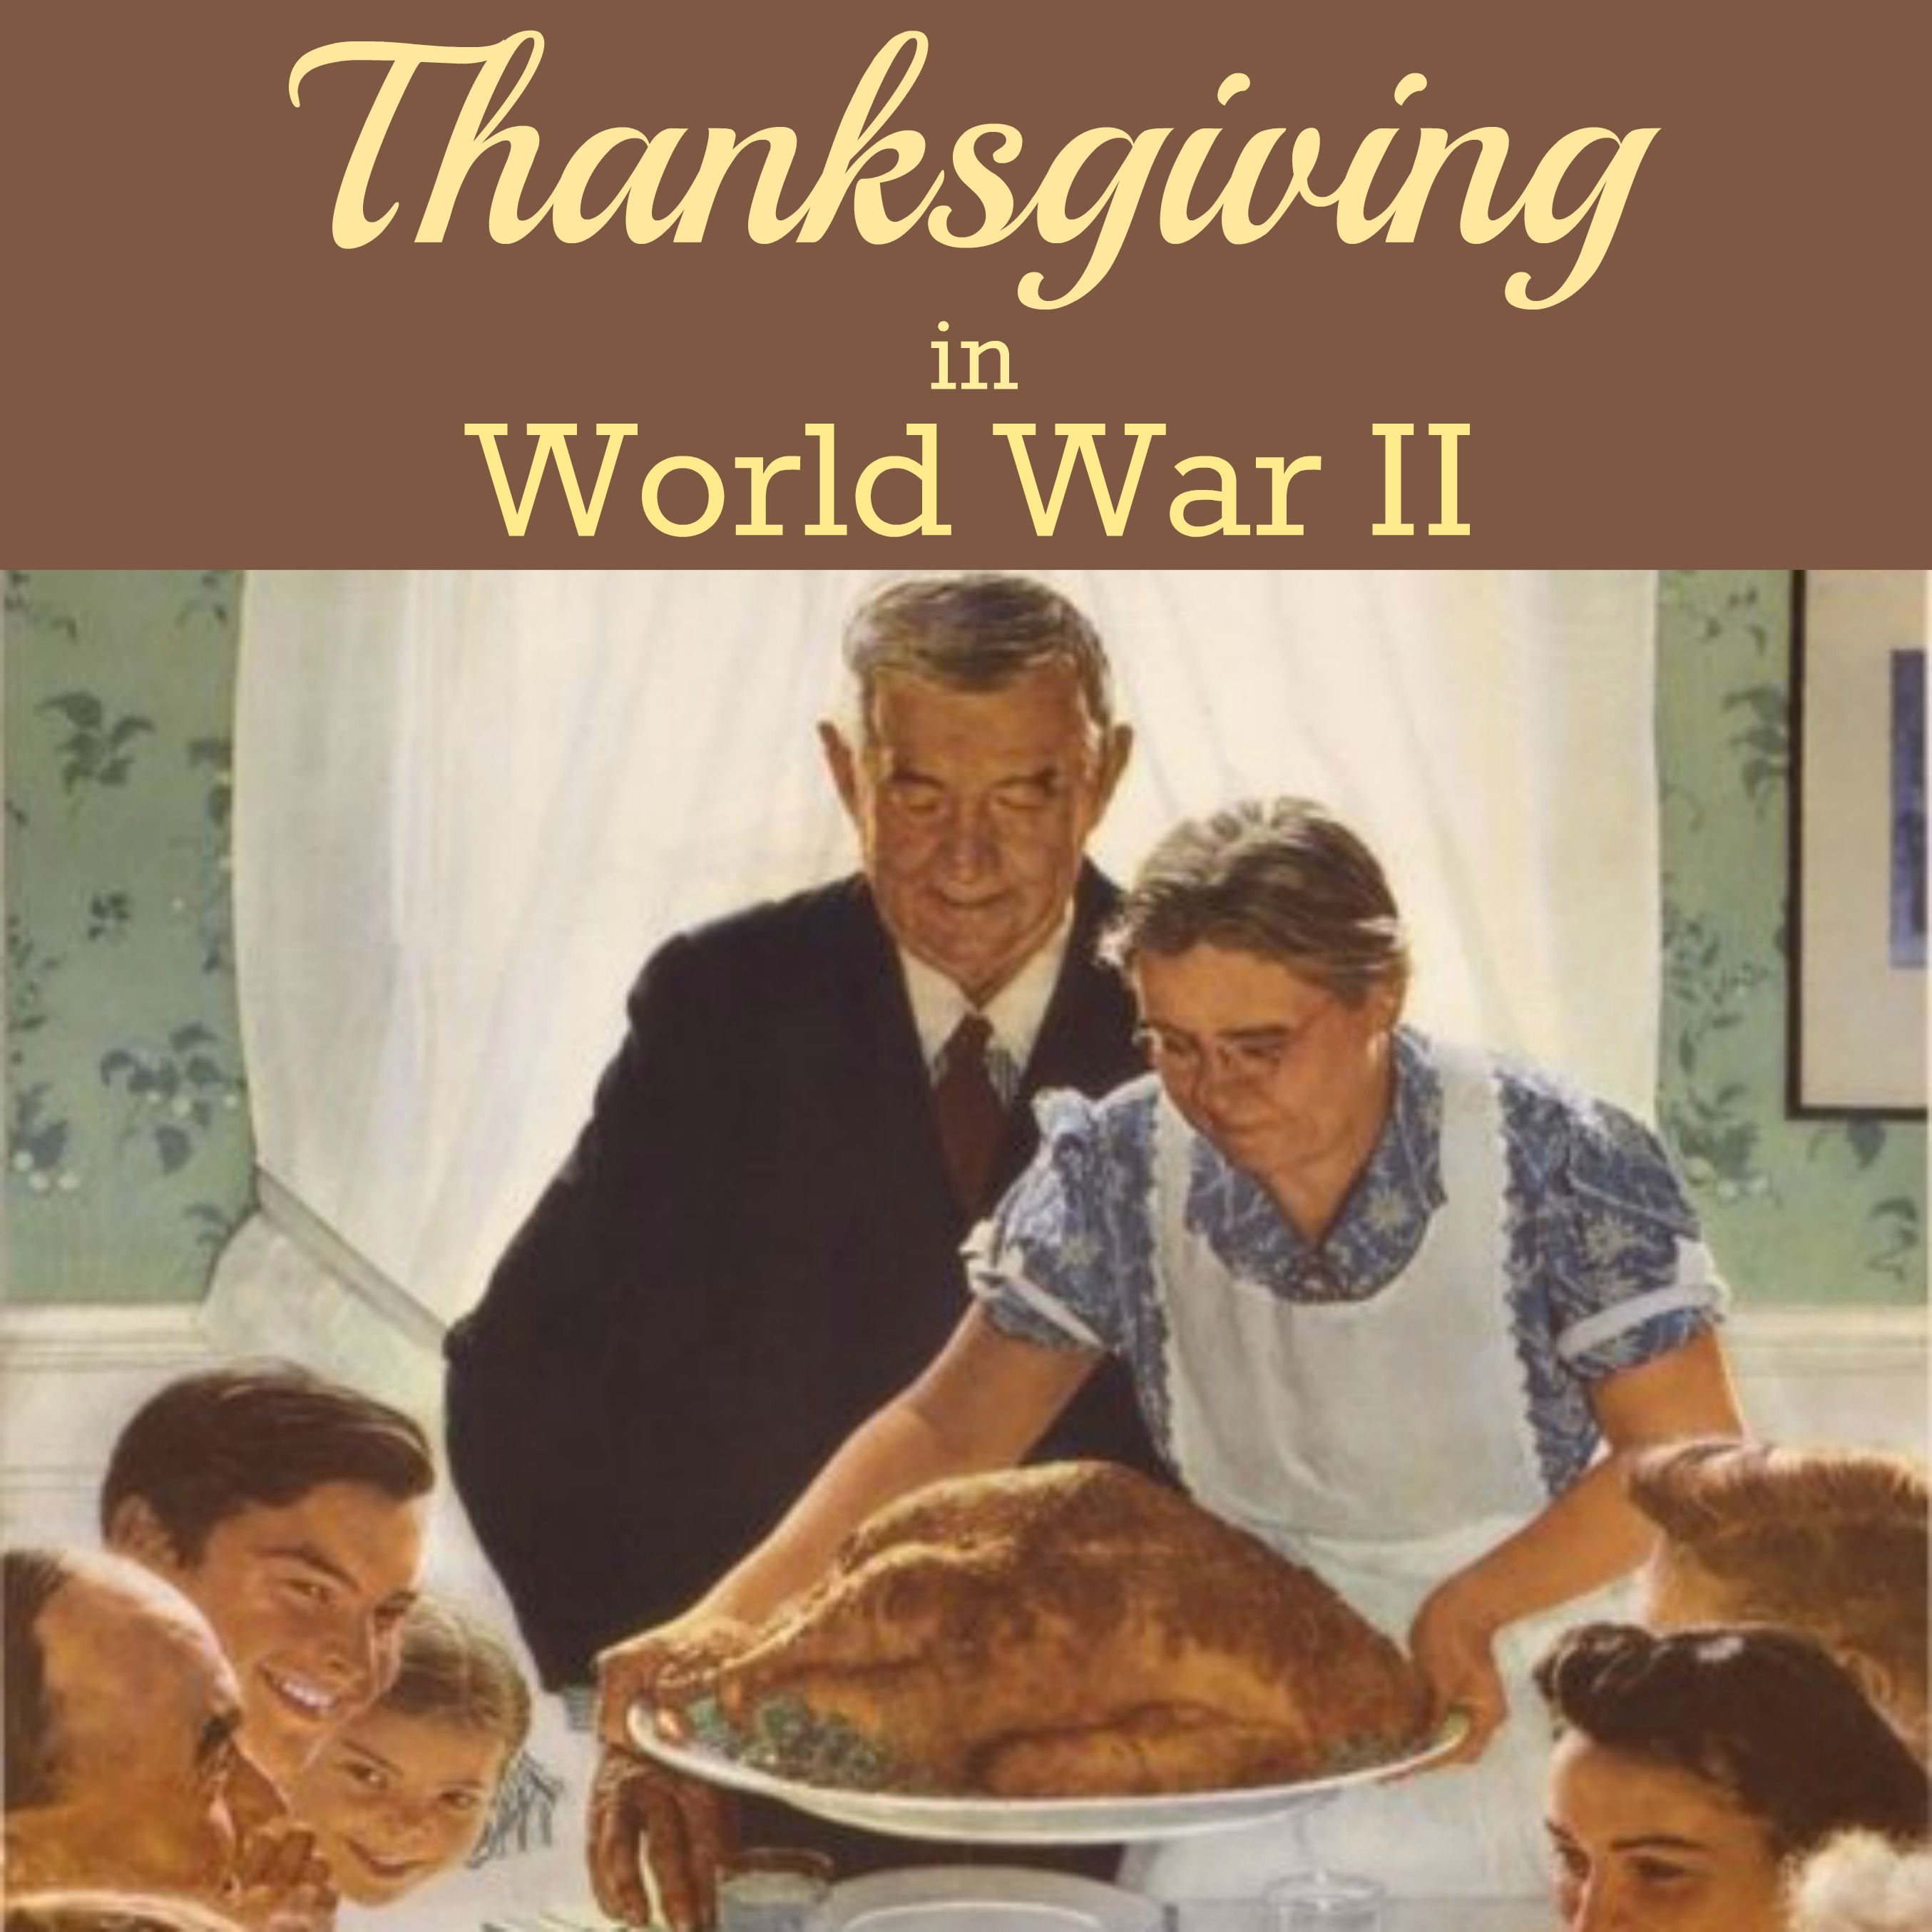 Thanksgiving 2022 Issue: The Story of Franksgiving